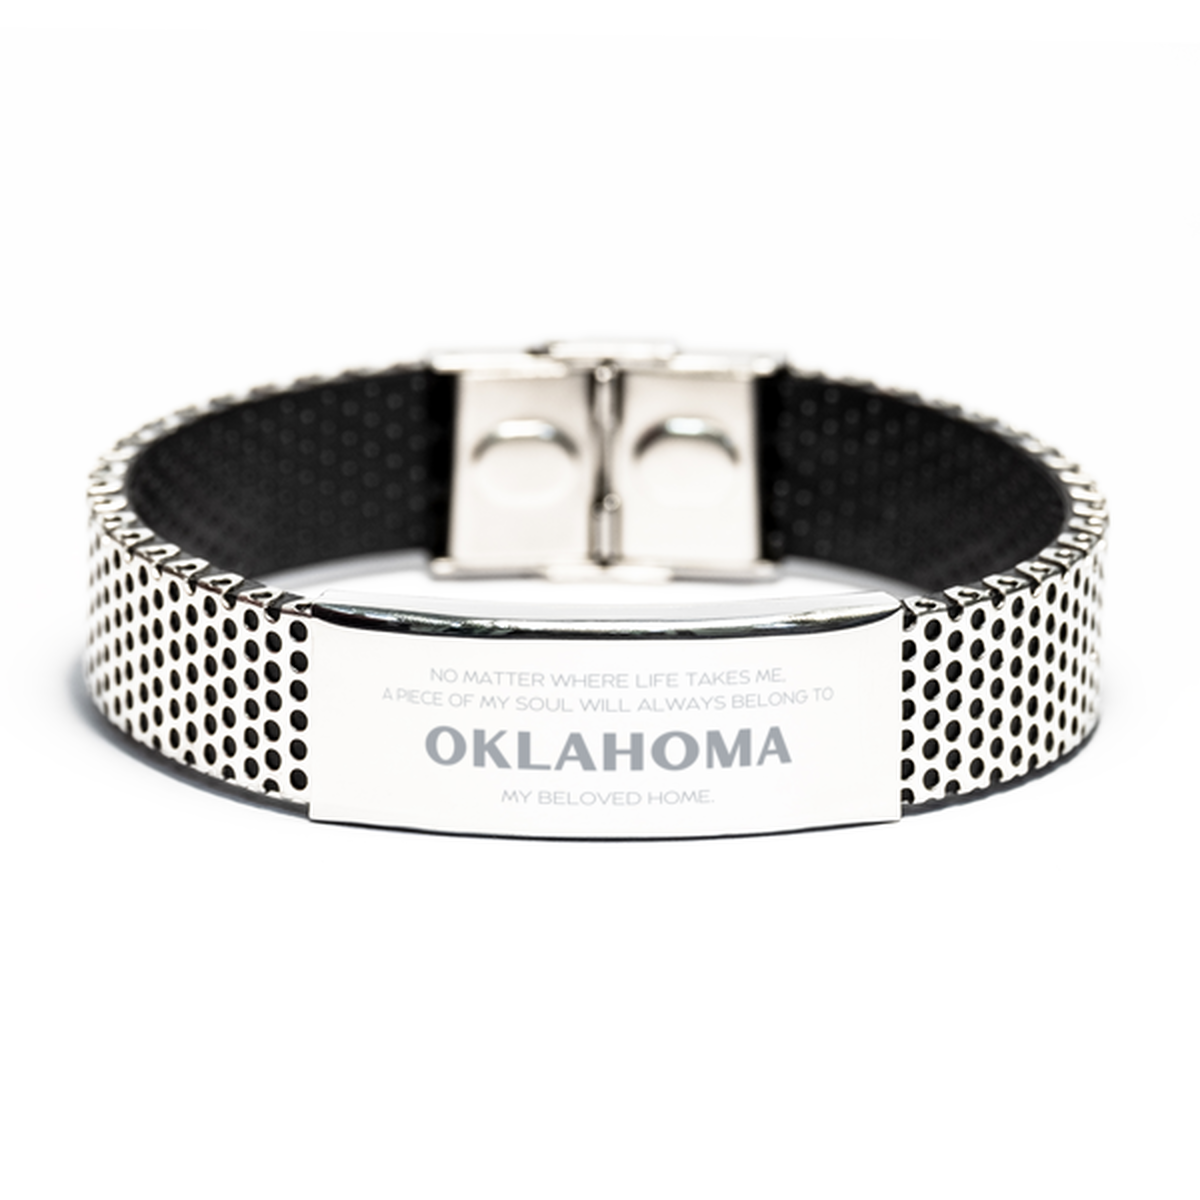 Love Oklahoma State Gifts, My soul will always belong to Oklahoma, Proud Stainless Steel Bracelet, Birthday Unique Gifts For Oklahoma Men, Women, Friends